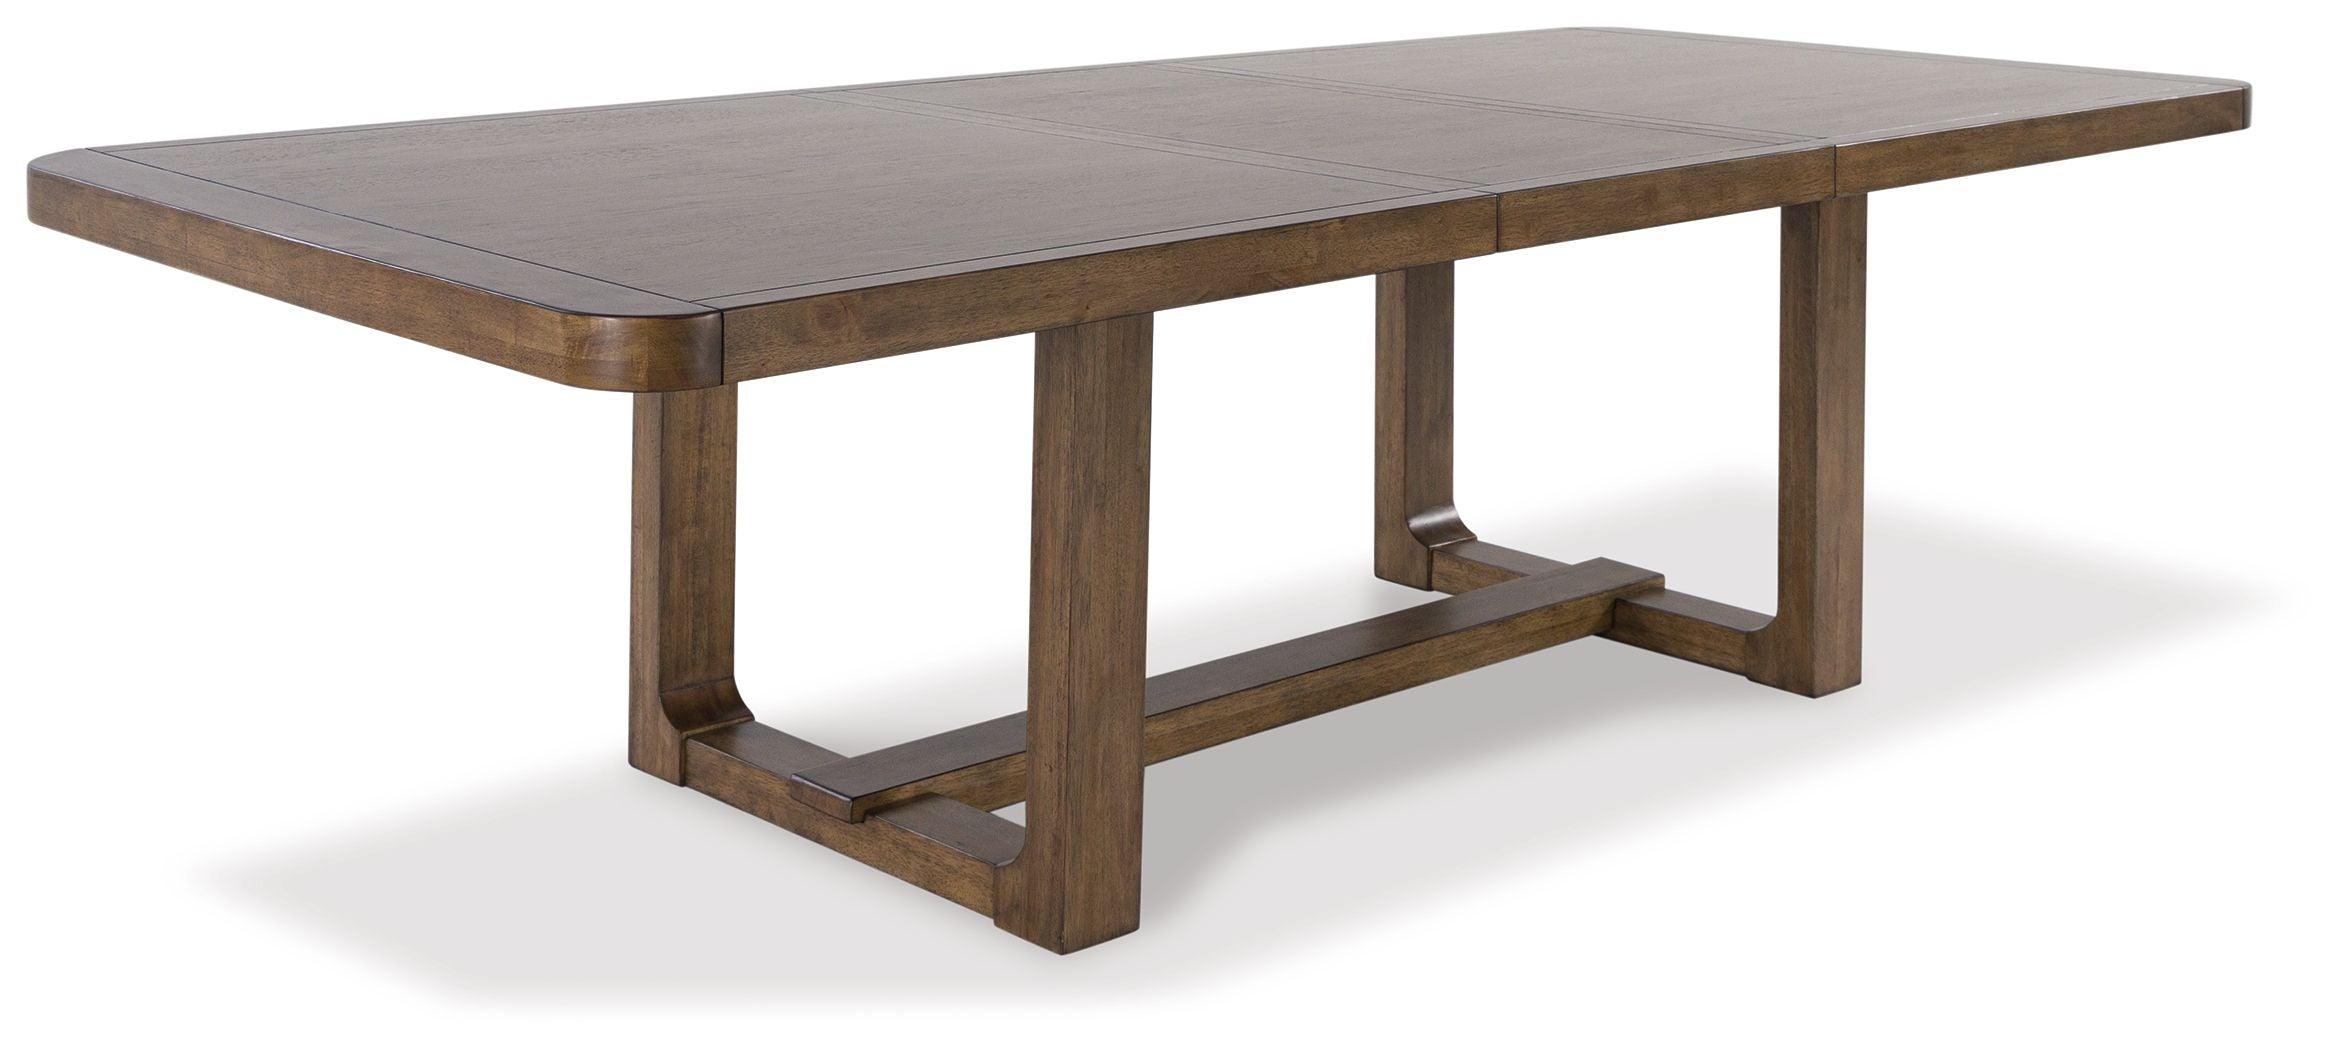 Signature Design by Ashley® - Cabalynn - Light Brown - Rectangular Dining Room Extension Table - 5th Avenue Furniture